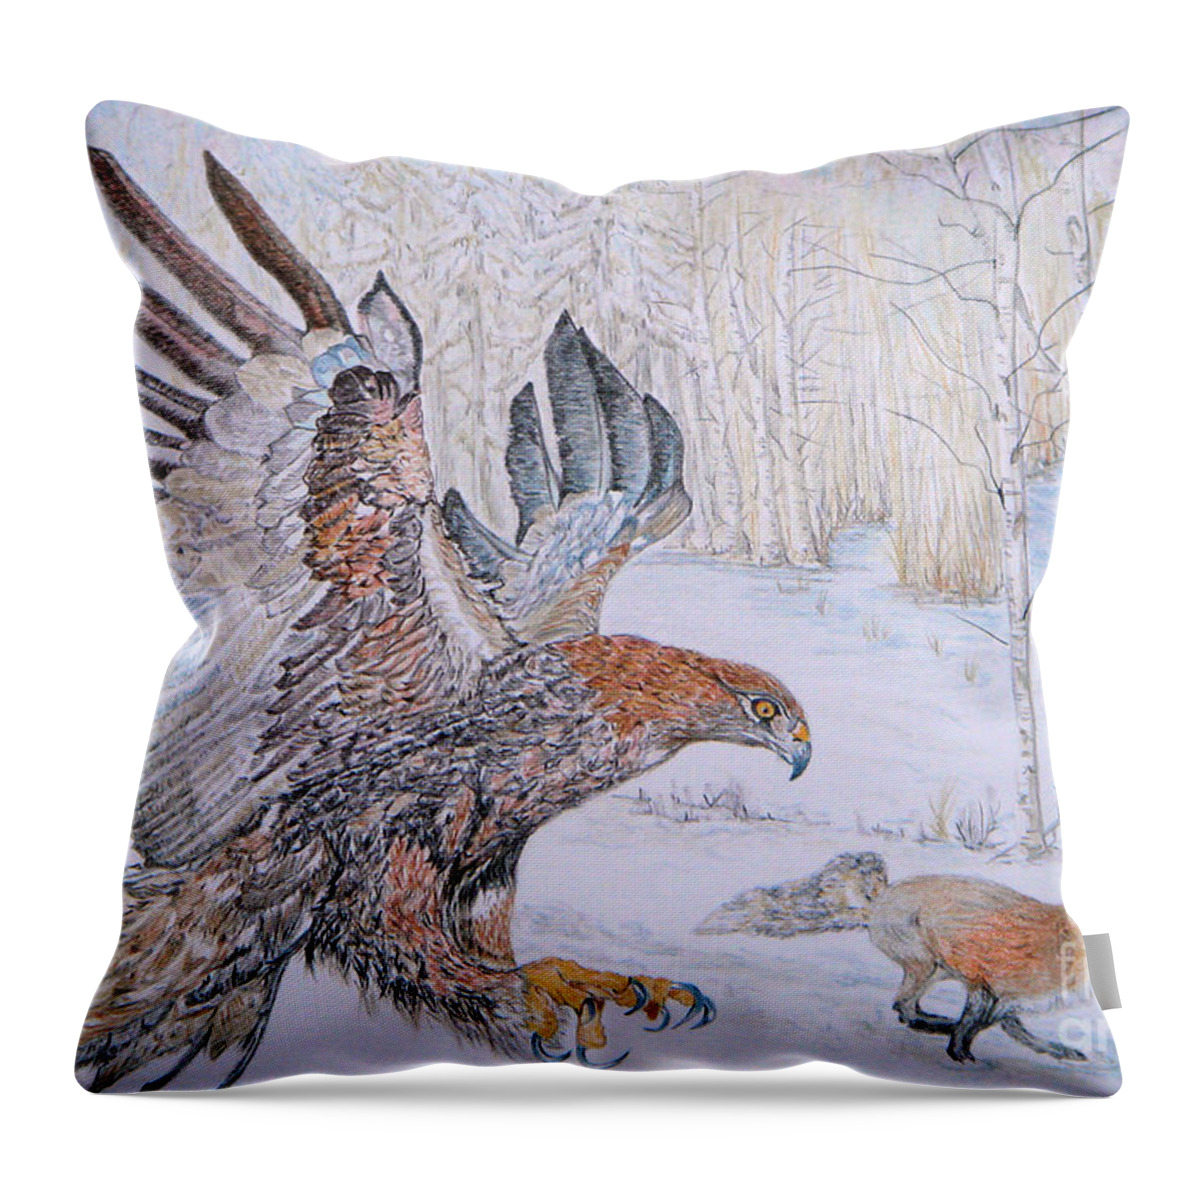 Winter Chase Throw Pillow featuring the drawing Winter Chase by Yvonne Johnstone